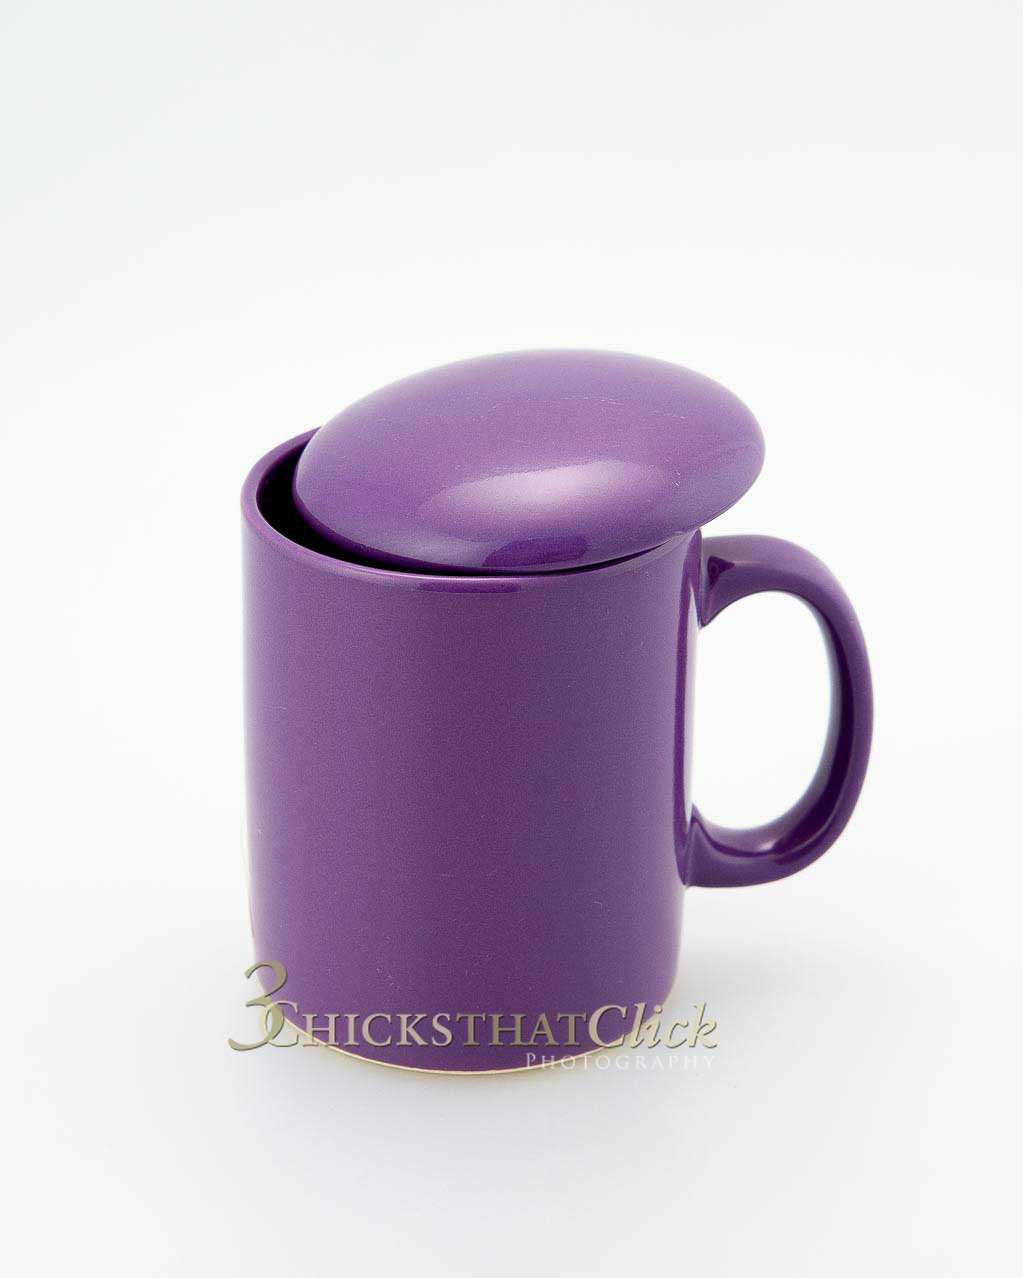 photo of purple teacup with lid